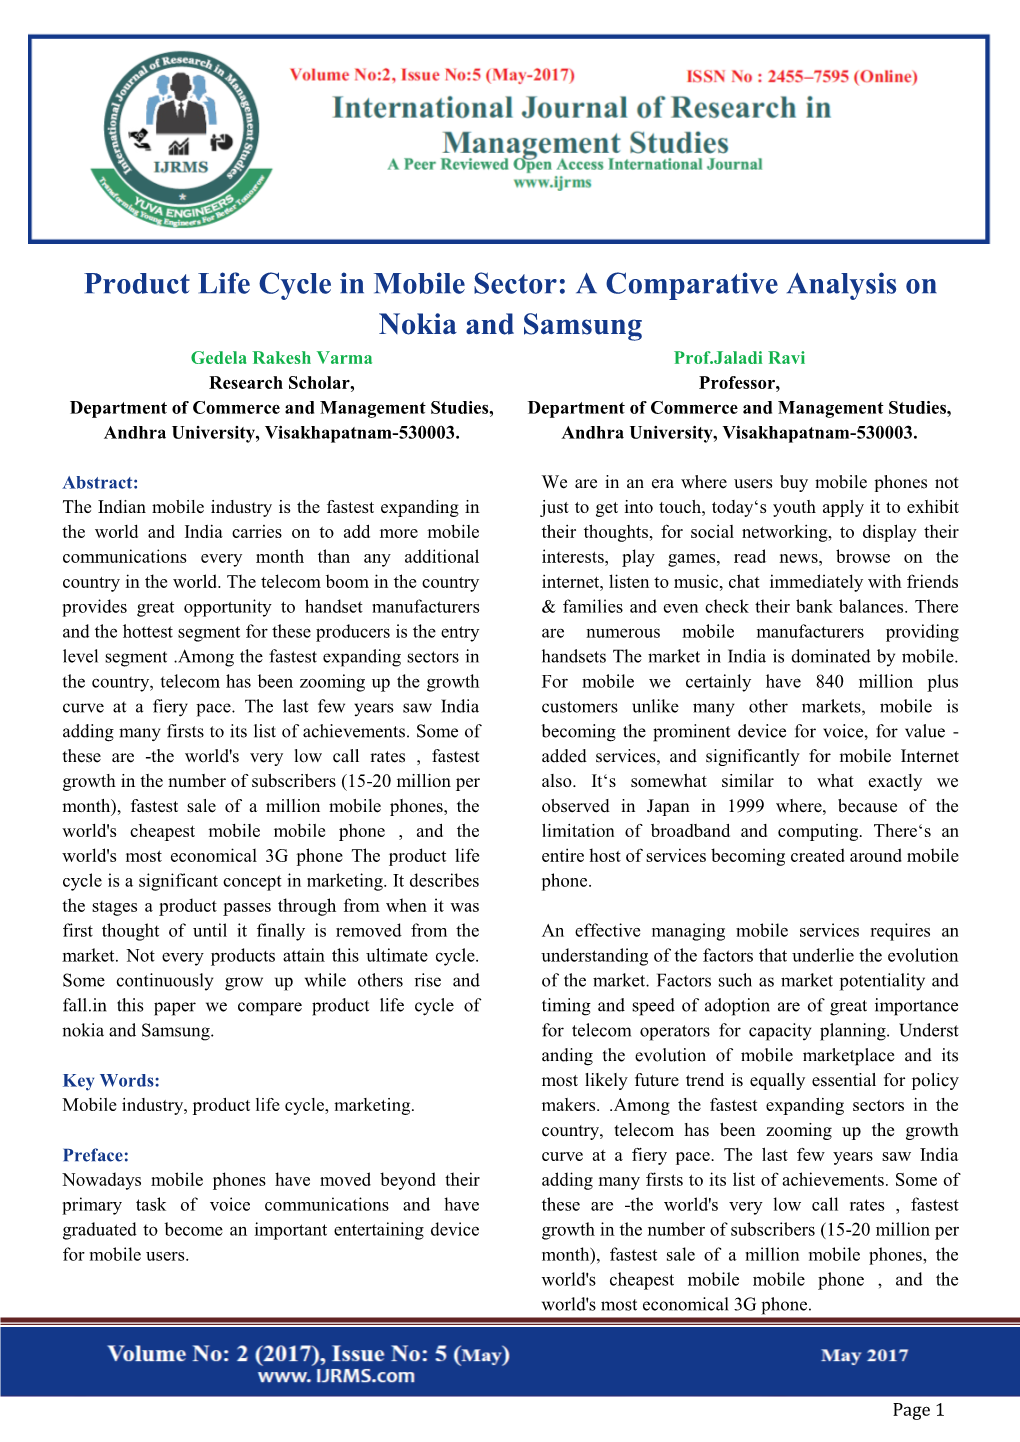 Product Life Cycle in Mobile Sector